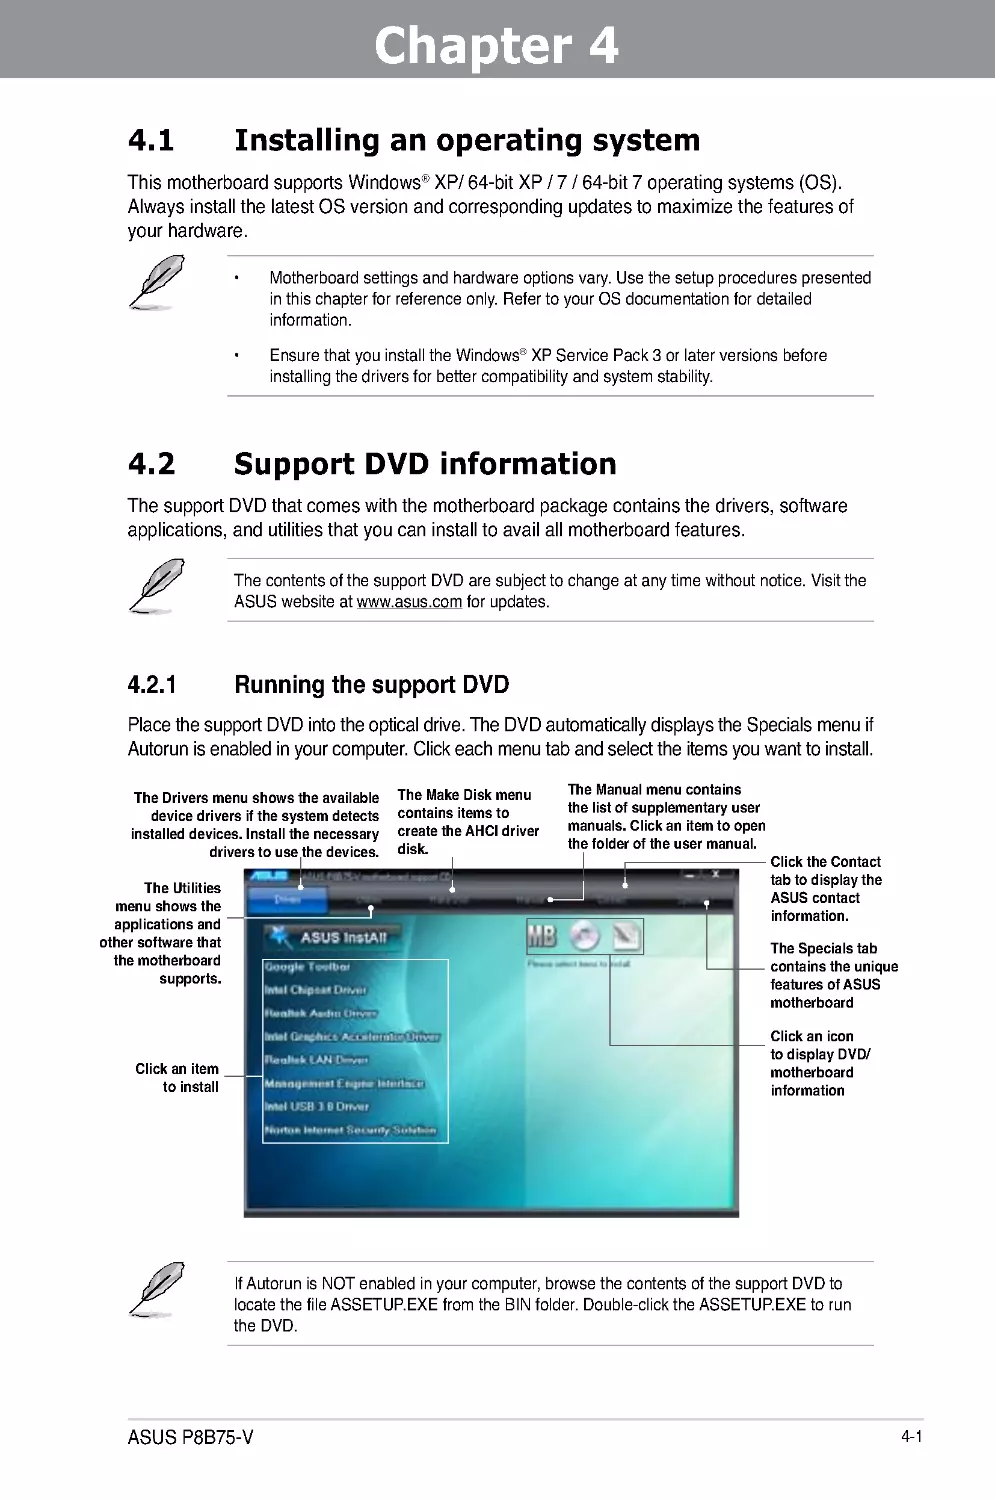 Chapter 4:	Software support
4.2	Support DVD information